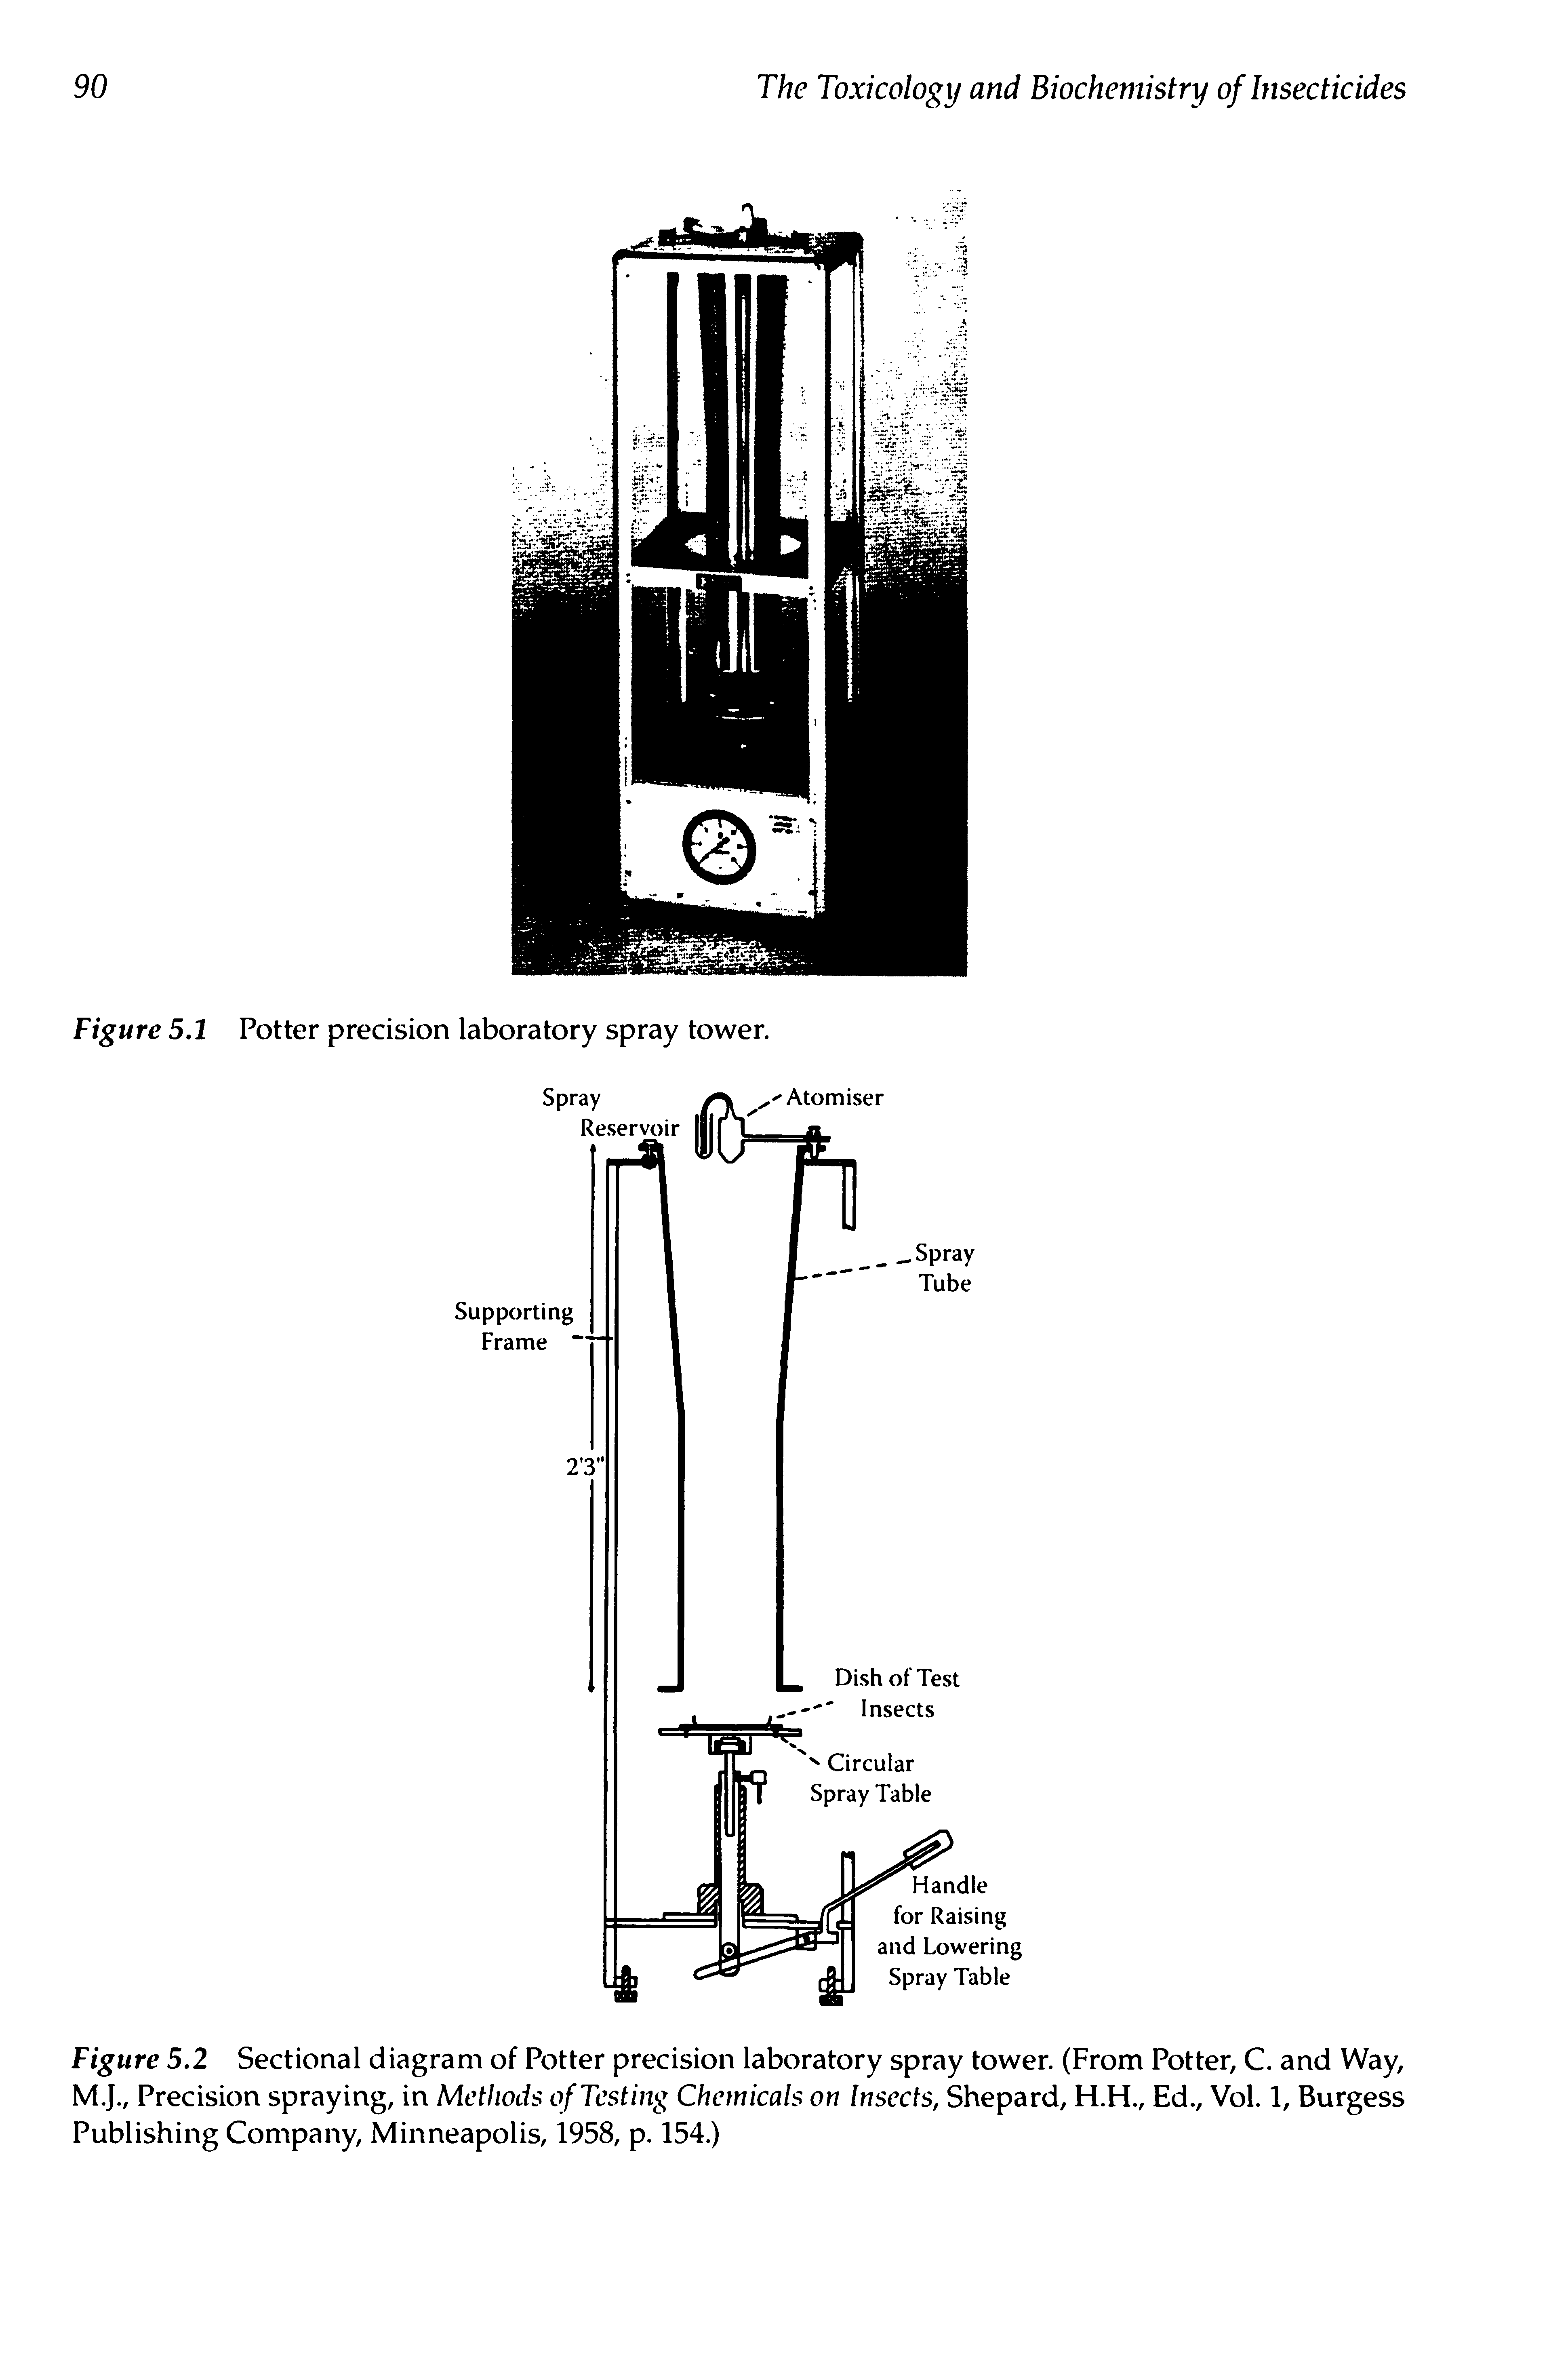 Figure 5.2 Sectional diagram of Potter precision laboratory spray tower. (From Potter, C. and Way, M.J., Precision spraying, in Methods of Testing Chemicals on Insects, Shepard, H.H., Ed., Vol. 1, Burgess Publishing Company, Minneapolis, 1958, p. 154.)...